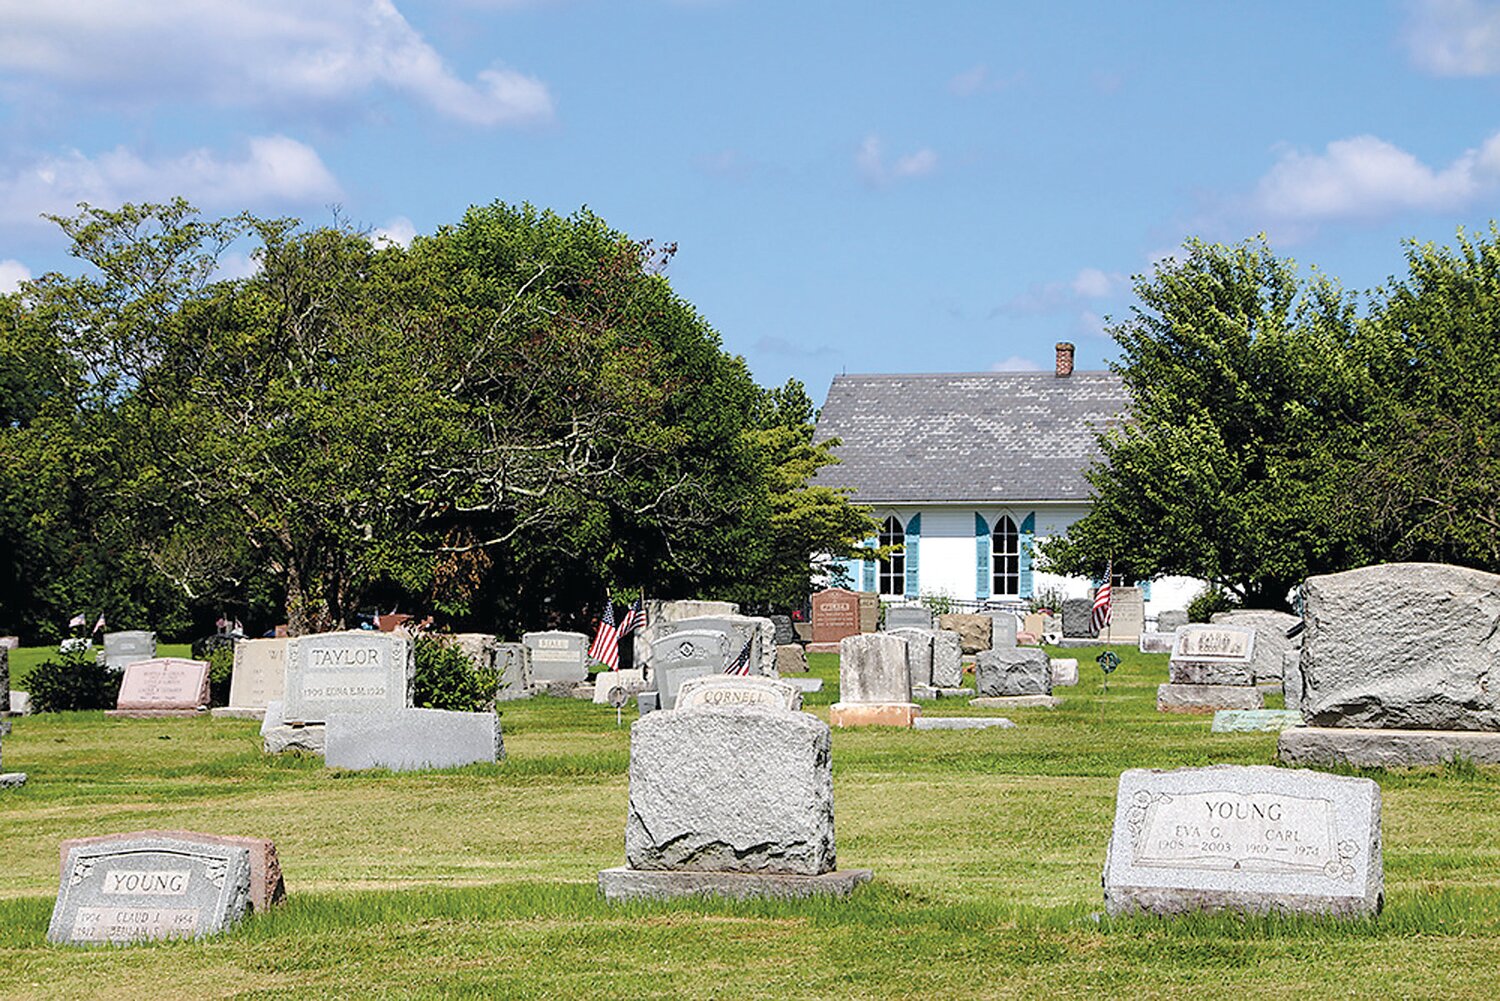 Beulah Cemetery is located at the intersection of Upper State and Almshouse roads.